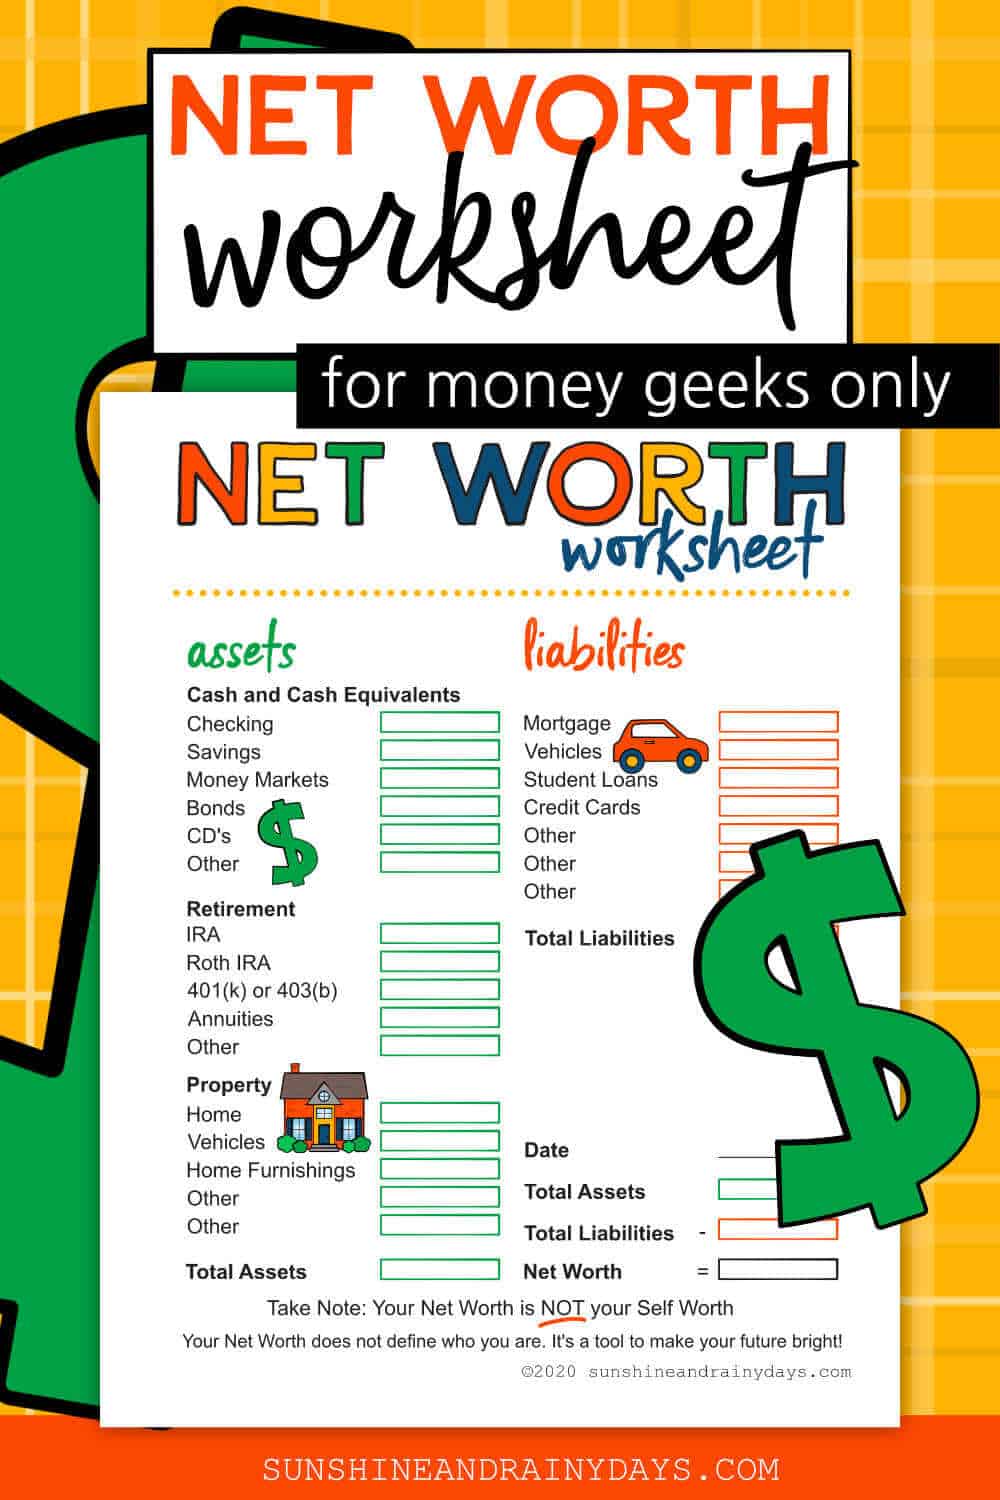 Net Worth Worksheet - Discover YOUR Net Worth - Sunshine and Inside Personal Net Worth Worksheet